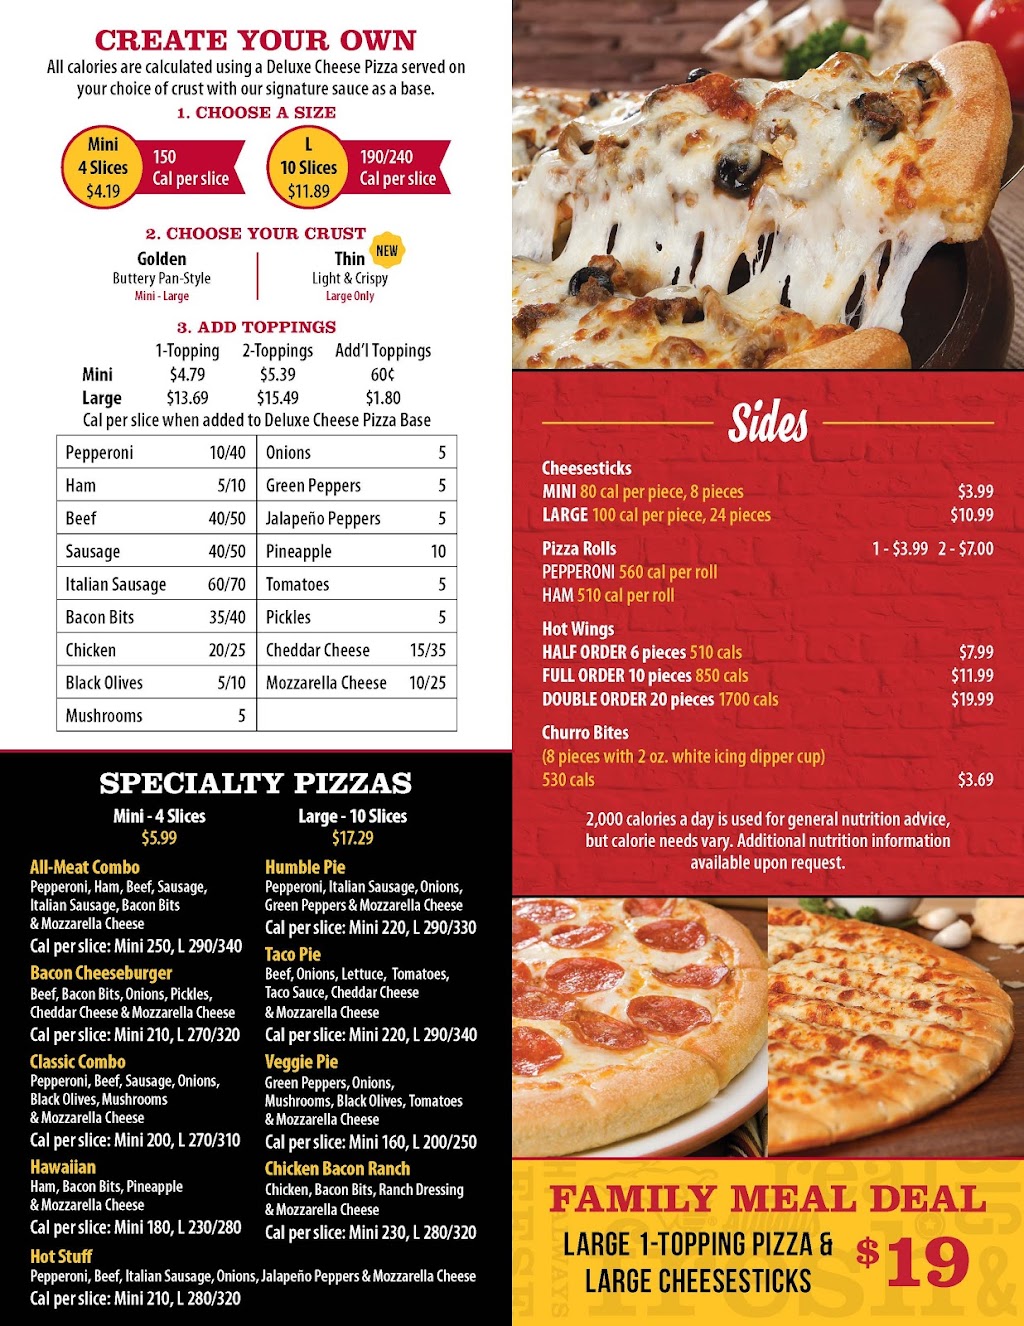 Godfathers Pizza Express | 1223 S Division St, Guthrie, OK 73044 | Phone: (405) 282-1884